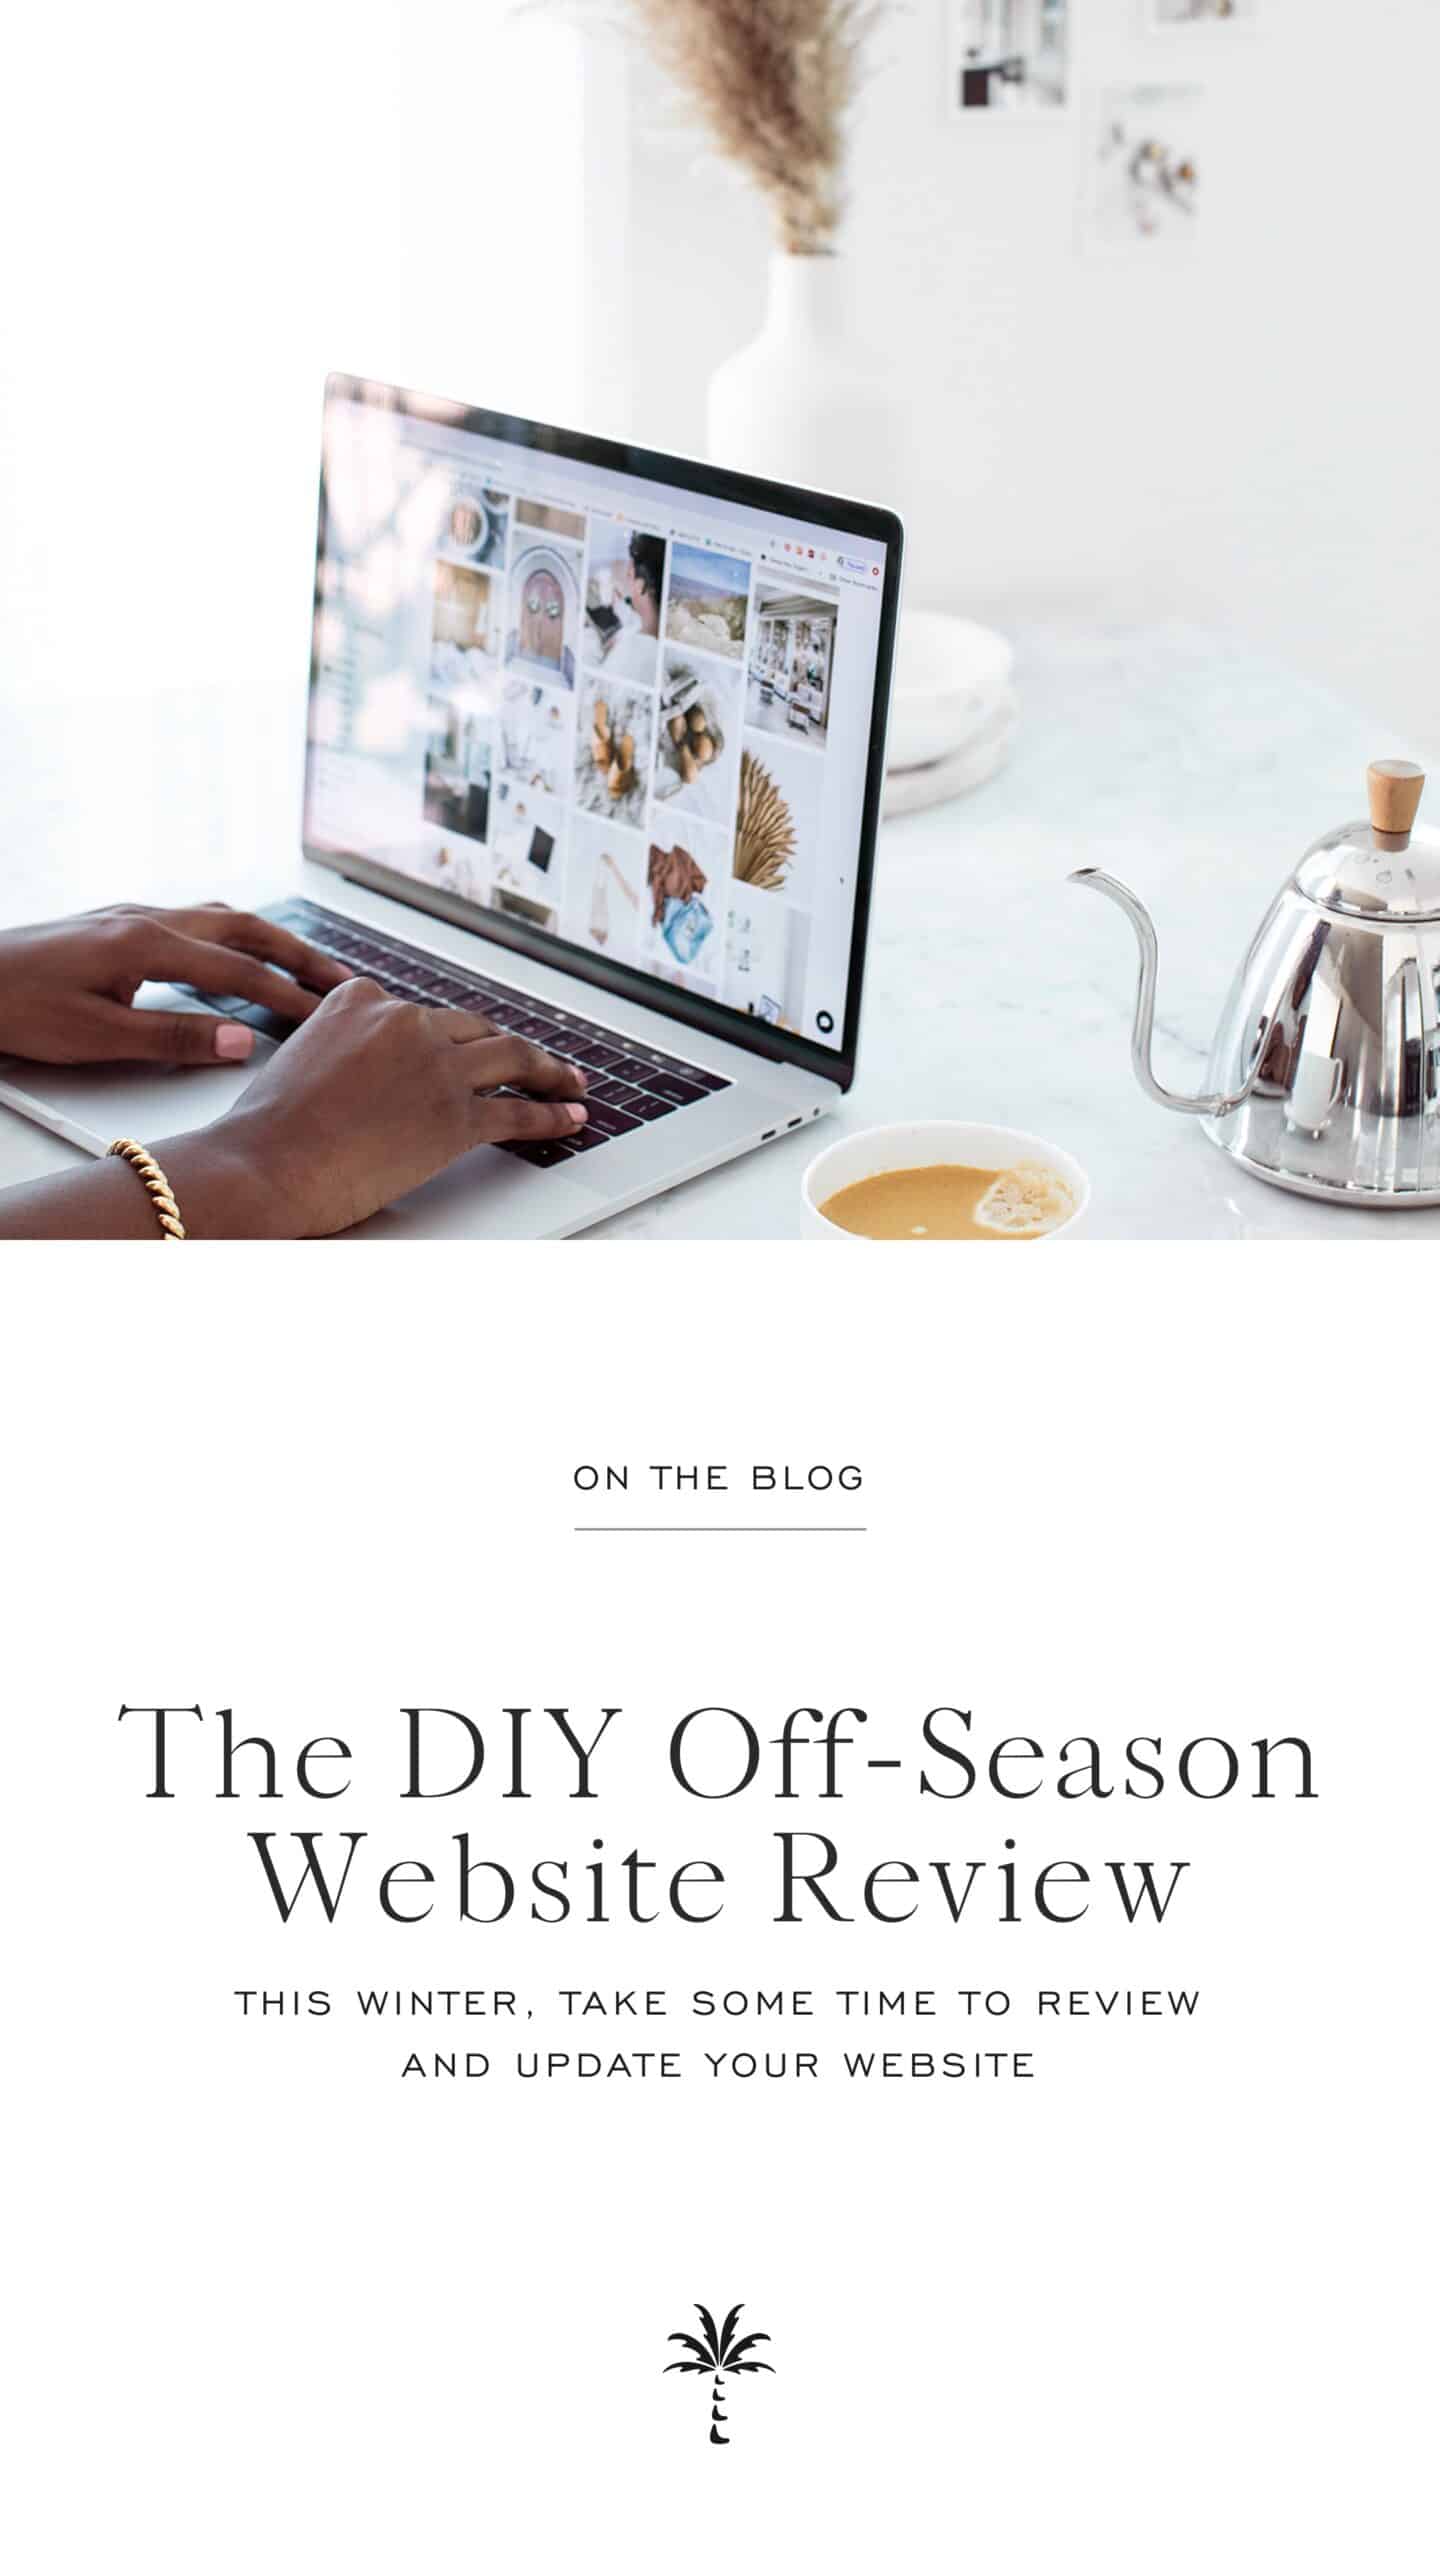 Updating your website this off-season? Start with this list!